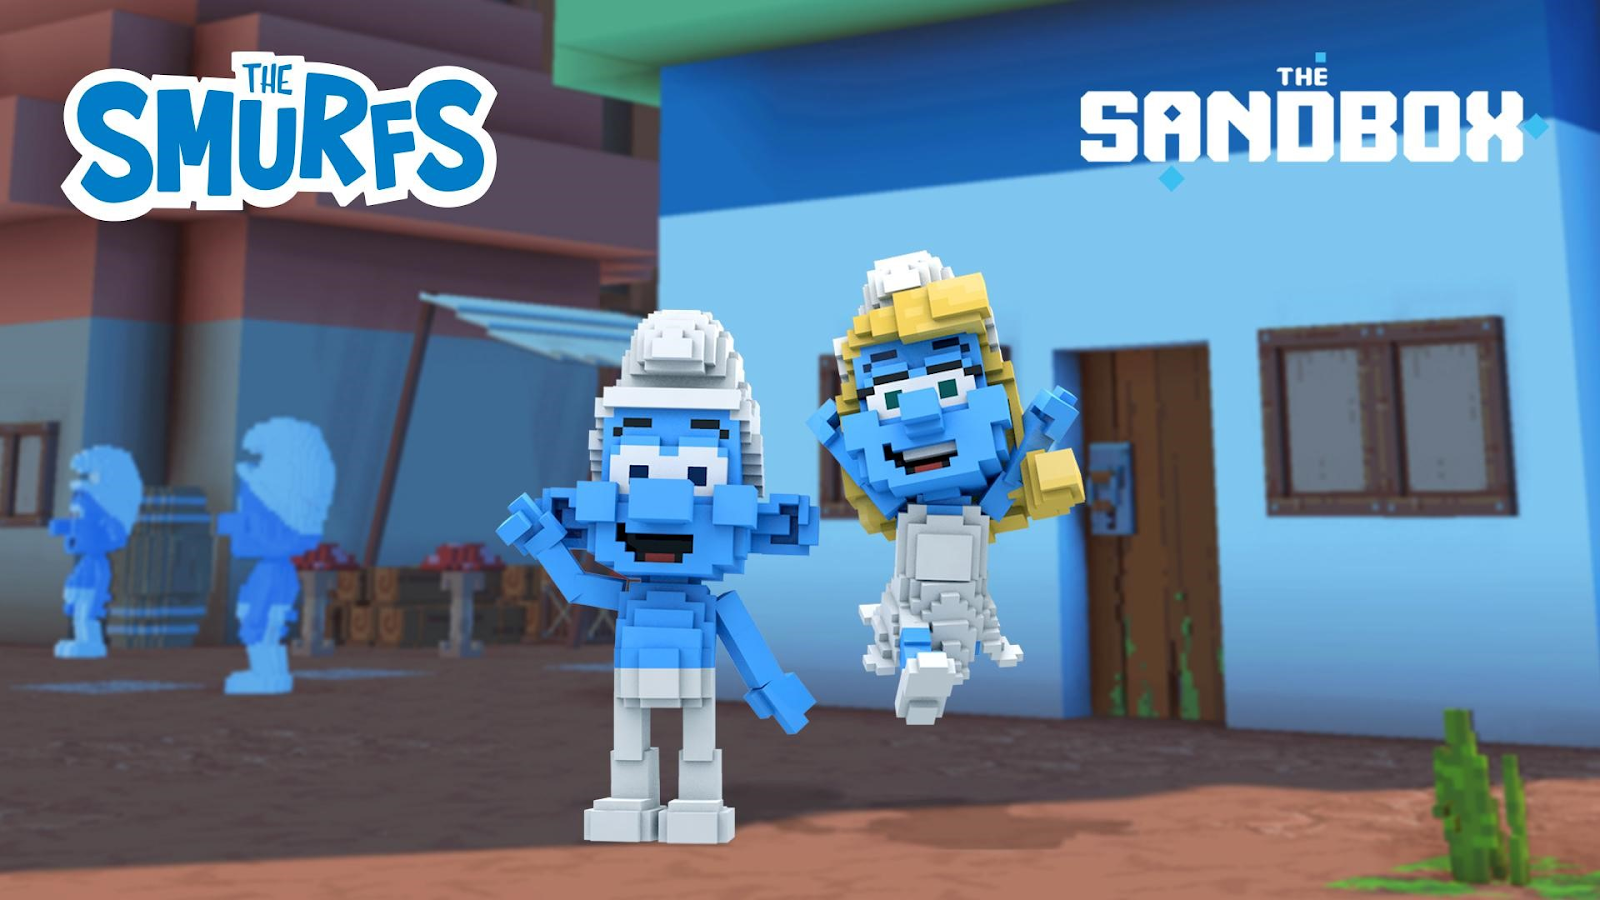 Games Based On The Smurfs That You Didn't Know About